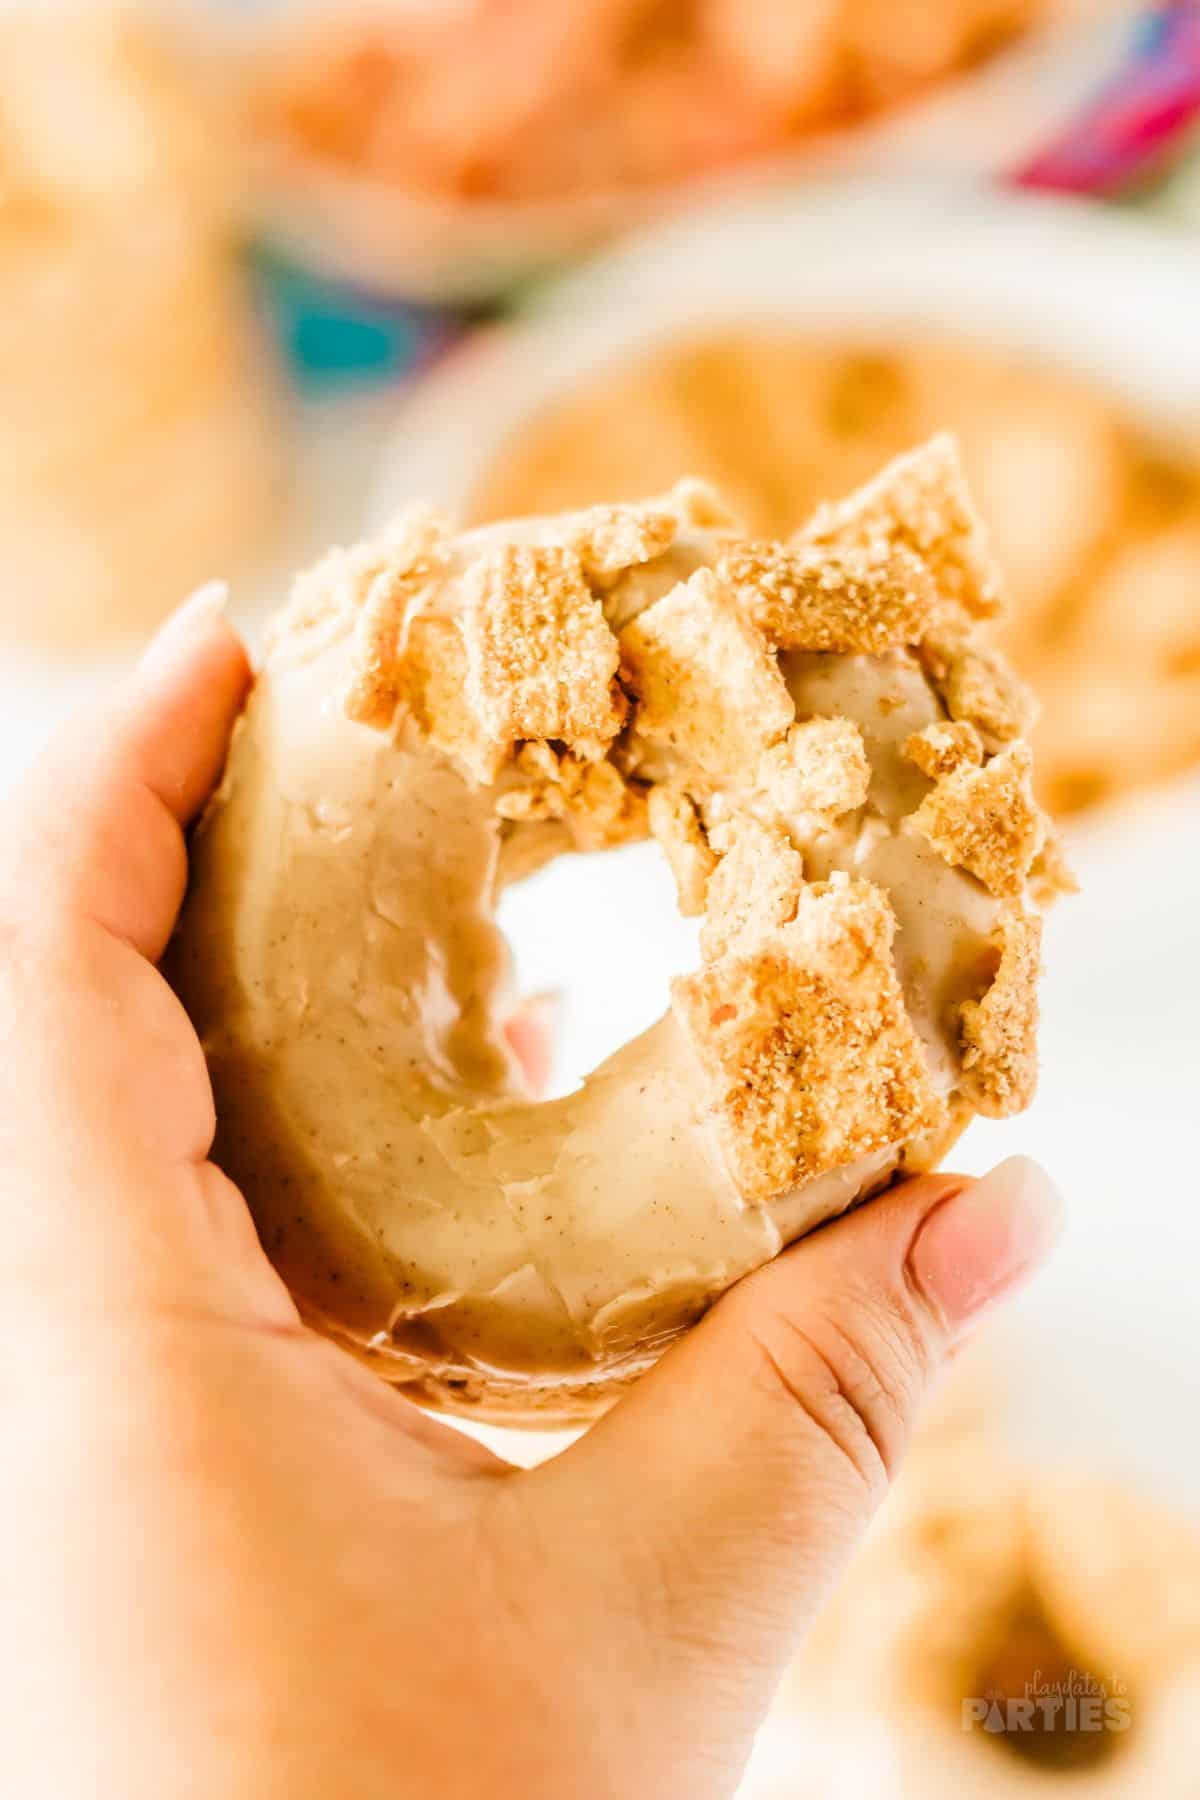 A woman's hand holding a Cinnamon Toast Crunch Cereal donut.